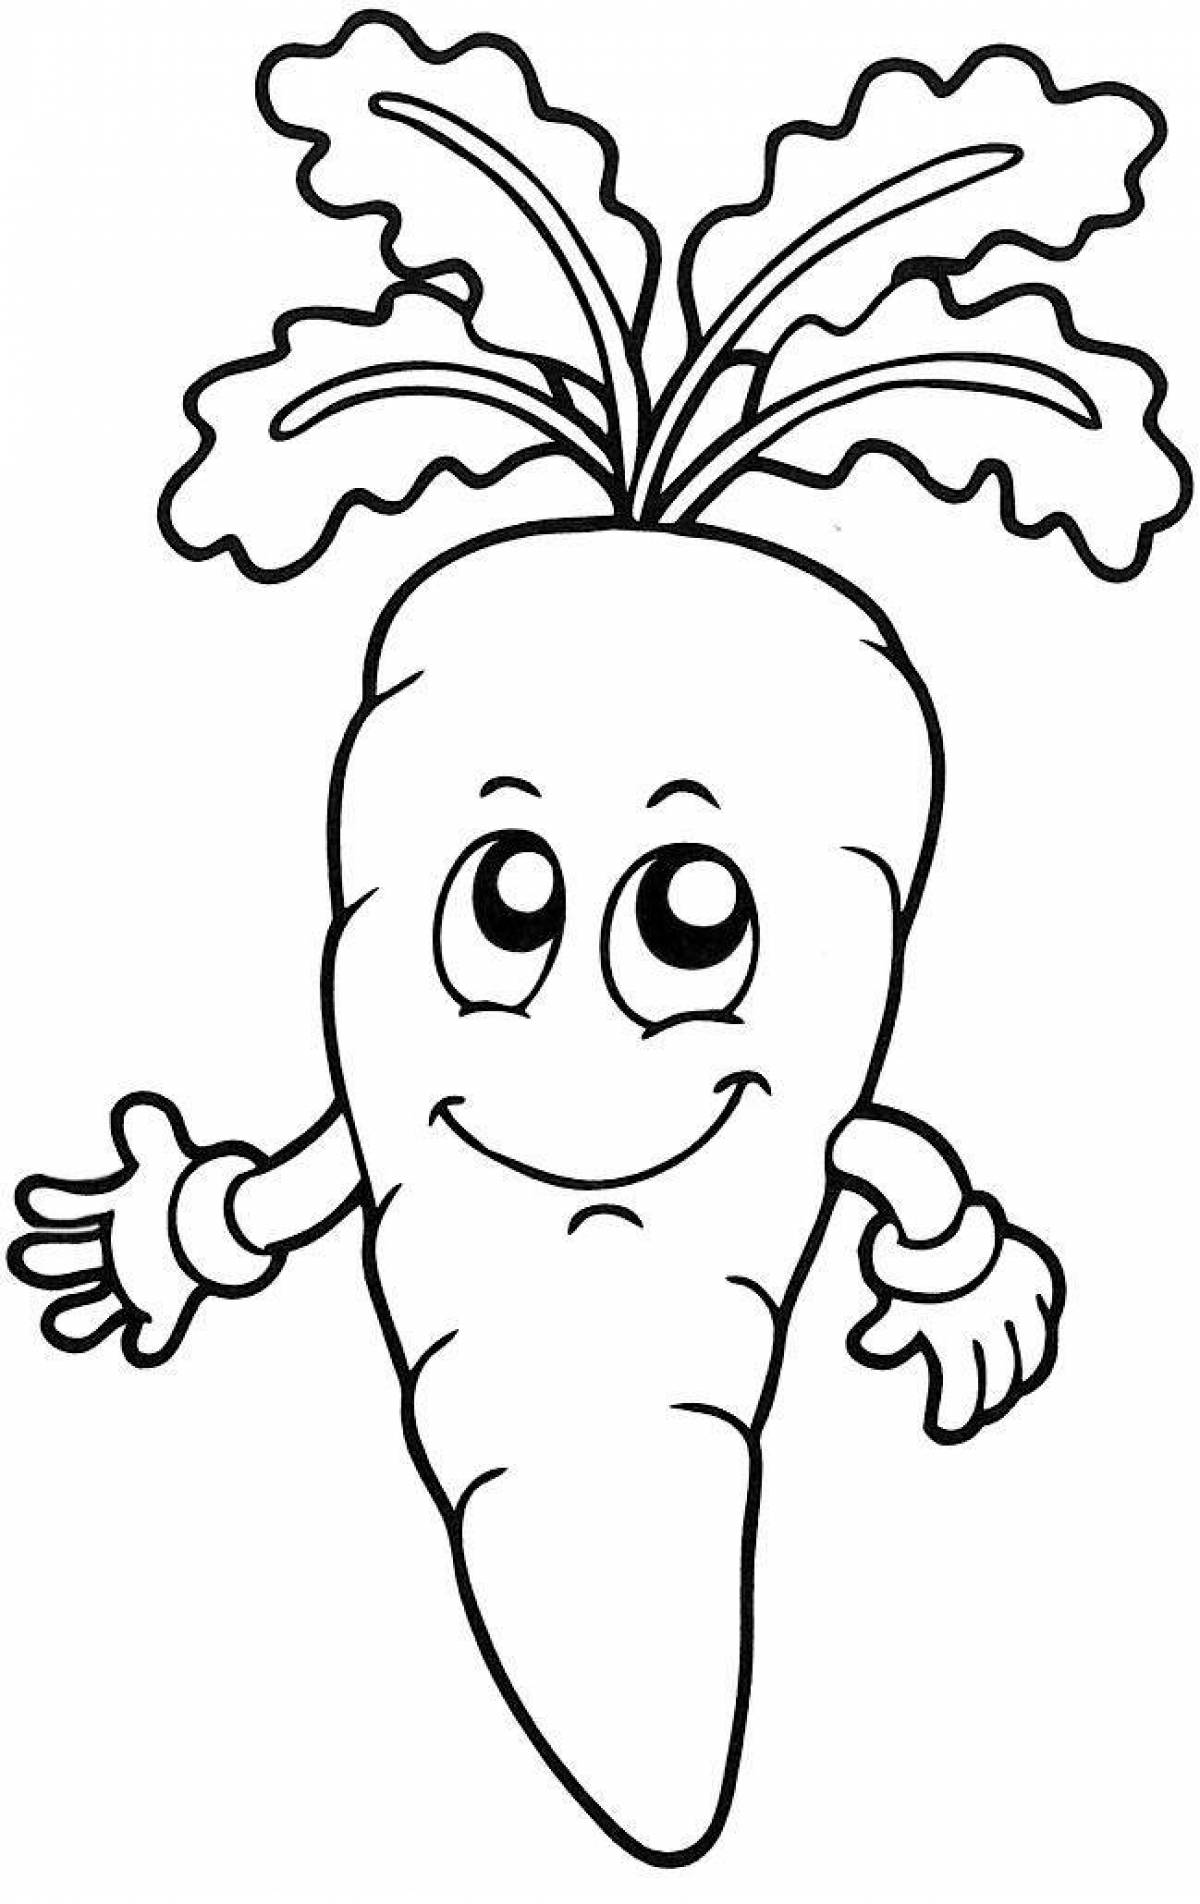 Interesting carrot coloring book for 2-3 year olds